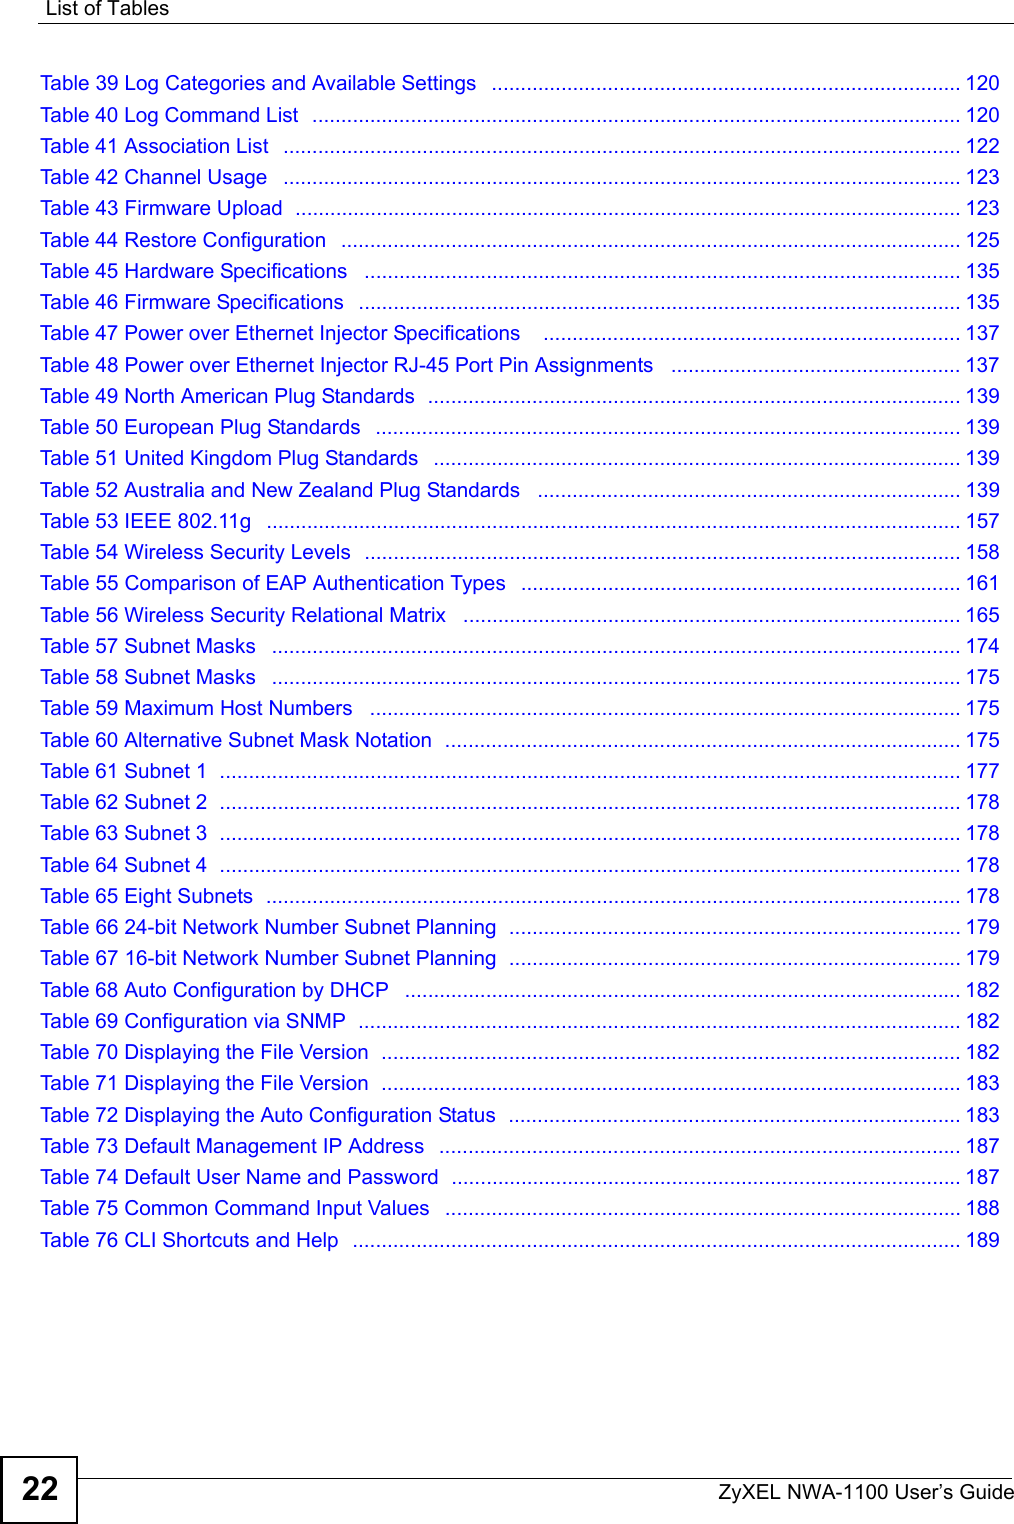 List of TablesZyXEL NWA-1100 User’s Guide22Table 39 Log Categories and Available Settings   ................................................................................. 120Table 40 Log Command List  ................................................................................................................ 120Table 41 Association List   ..................................................................................................................... 122Table 42 Channel Usage   ..................................................................................................................... 123Table 43 Firmware Upload  ................................................................................................................... 123Table 44 Restore Configuration   ........................................................................................................... 125Table 45 Hardware Specifications   ....................................................................................................... 135Table 46 Firmware Specifications   ........................................................................................................ 135Table 47 Power over Ethernet Injector Specifications    ........................................................................ 137Table 48 Power over Ethernet Injector RJ-45 Port Pin Assignments   .................................................. 137Table 49 North American Plug Standards  ............................................................................................ 139Table 50 European Plug Standards   ..................................................................................................... 139Table 51 United Kingdom Plug Standards   ........................................................................................... 139Table 52 Australia and New Zealand Plug Standards   ......................................................................... 139Table 53 IEEE 802.11g   ........................................................................................................................ 157Table 54 Wireless Security Levels  ....................................................................................................... 158Table 55 Comparison of EAP Authentication Types   ............................................................................ 161Table 56 Wireless Security Relational Matrix   ...................................................................................... 165Table 57 Subnet Masks   ....................................................................................................................... 174Table 58 Subnet Masks   ....................................................................................................................... 175Table 59 Maximum Host Numbers   ...................................................................................................... 175Table 60 Alternative Subnet Mask Notation  ......................................................................................... 175Table 61 Subnet 1  ................................................................................................................................ 177Table 62 Subnet 2  ................................................................................................................................ 178Table 63 Subnet 3  ................................................................................................................................ 178Table 64 Subnet 4  ................................................................................................................................ 178Table 65 Eight Subnets  ........................................................................................................................ 178Table 66 24-bit Network Number Subnet Planning  .............................................................................. 179Table 67 16-bit Network Number Subnet Planning  .............................................................................. 179Table 68 Auto Configuration by DHCP   ................................................................................................ 182Table 69 Configuration via SNMP  ........................................................................................................ 182Table 70 Displaying the File Version  .................................................................................................... 182Table 71 Displaying the File Version  .................................................................................................... 183Table 72 Displaying the Auto Configuration Status  .............................................................................. 183Table 73 Default Management IP Address   .......................................................................................... 187Table 74 Default User Name and Password  ........................................................................................ 187Table 75 Common Command Input Values   ......................................................................................... 188Table 76 CLI Shortcuts and Help   ......................................................................................................... 189